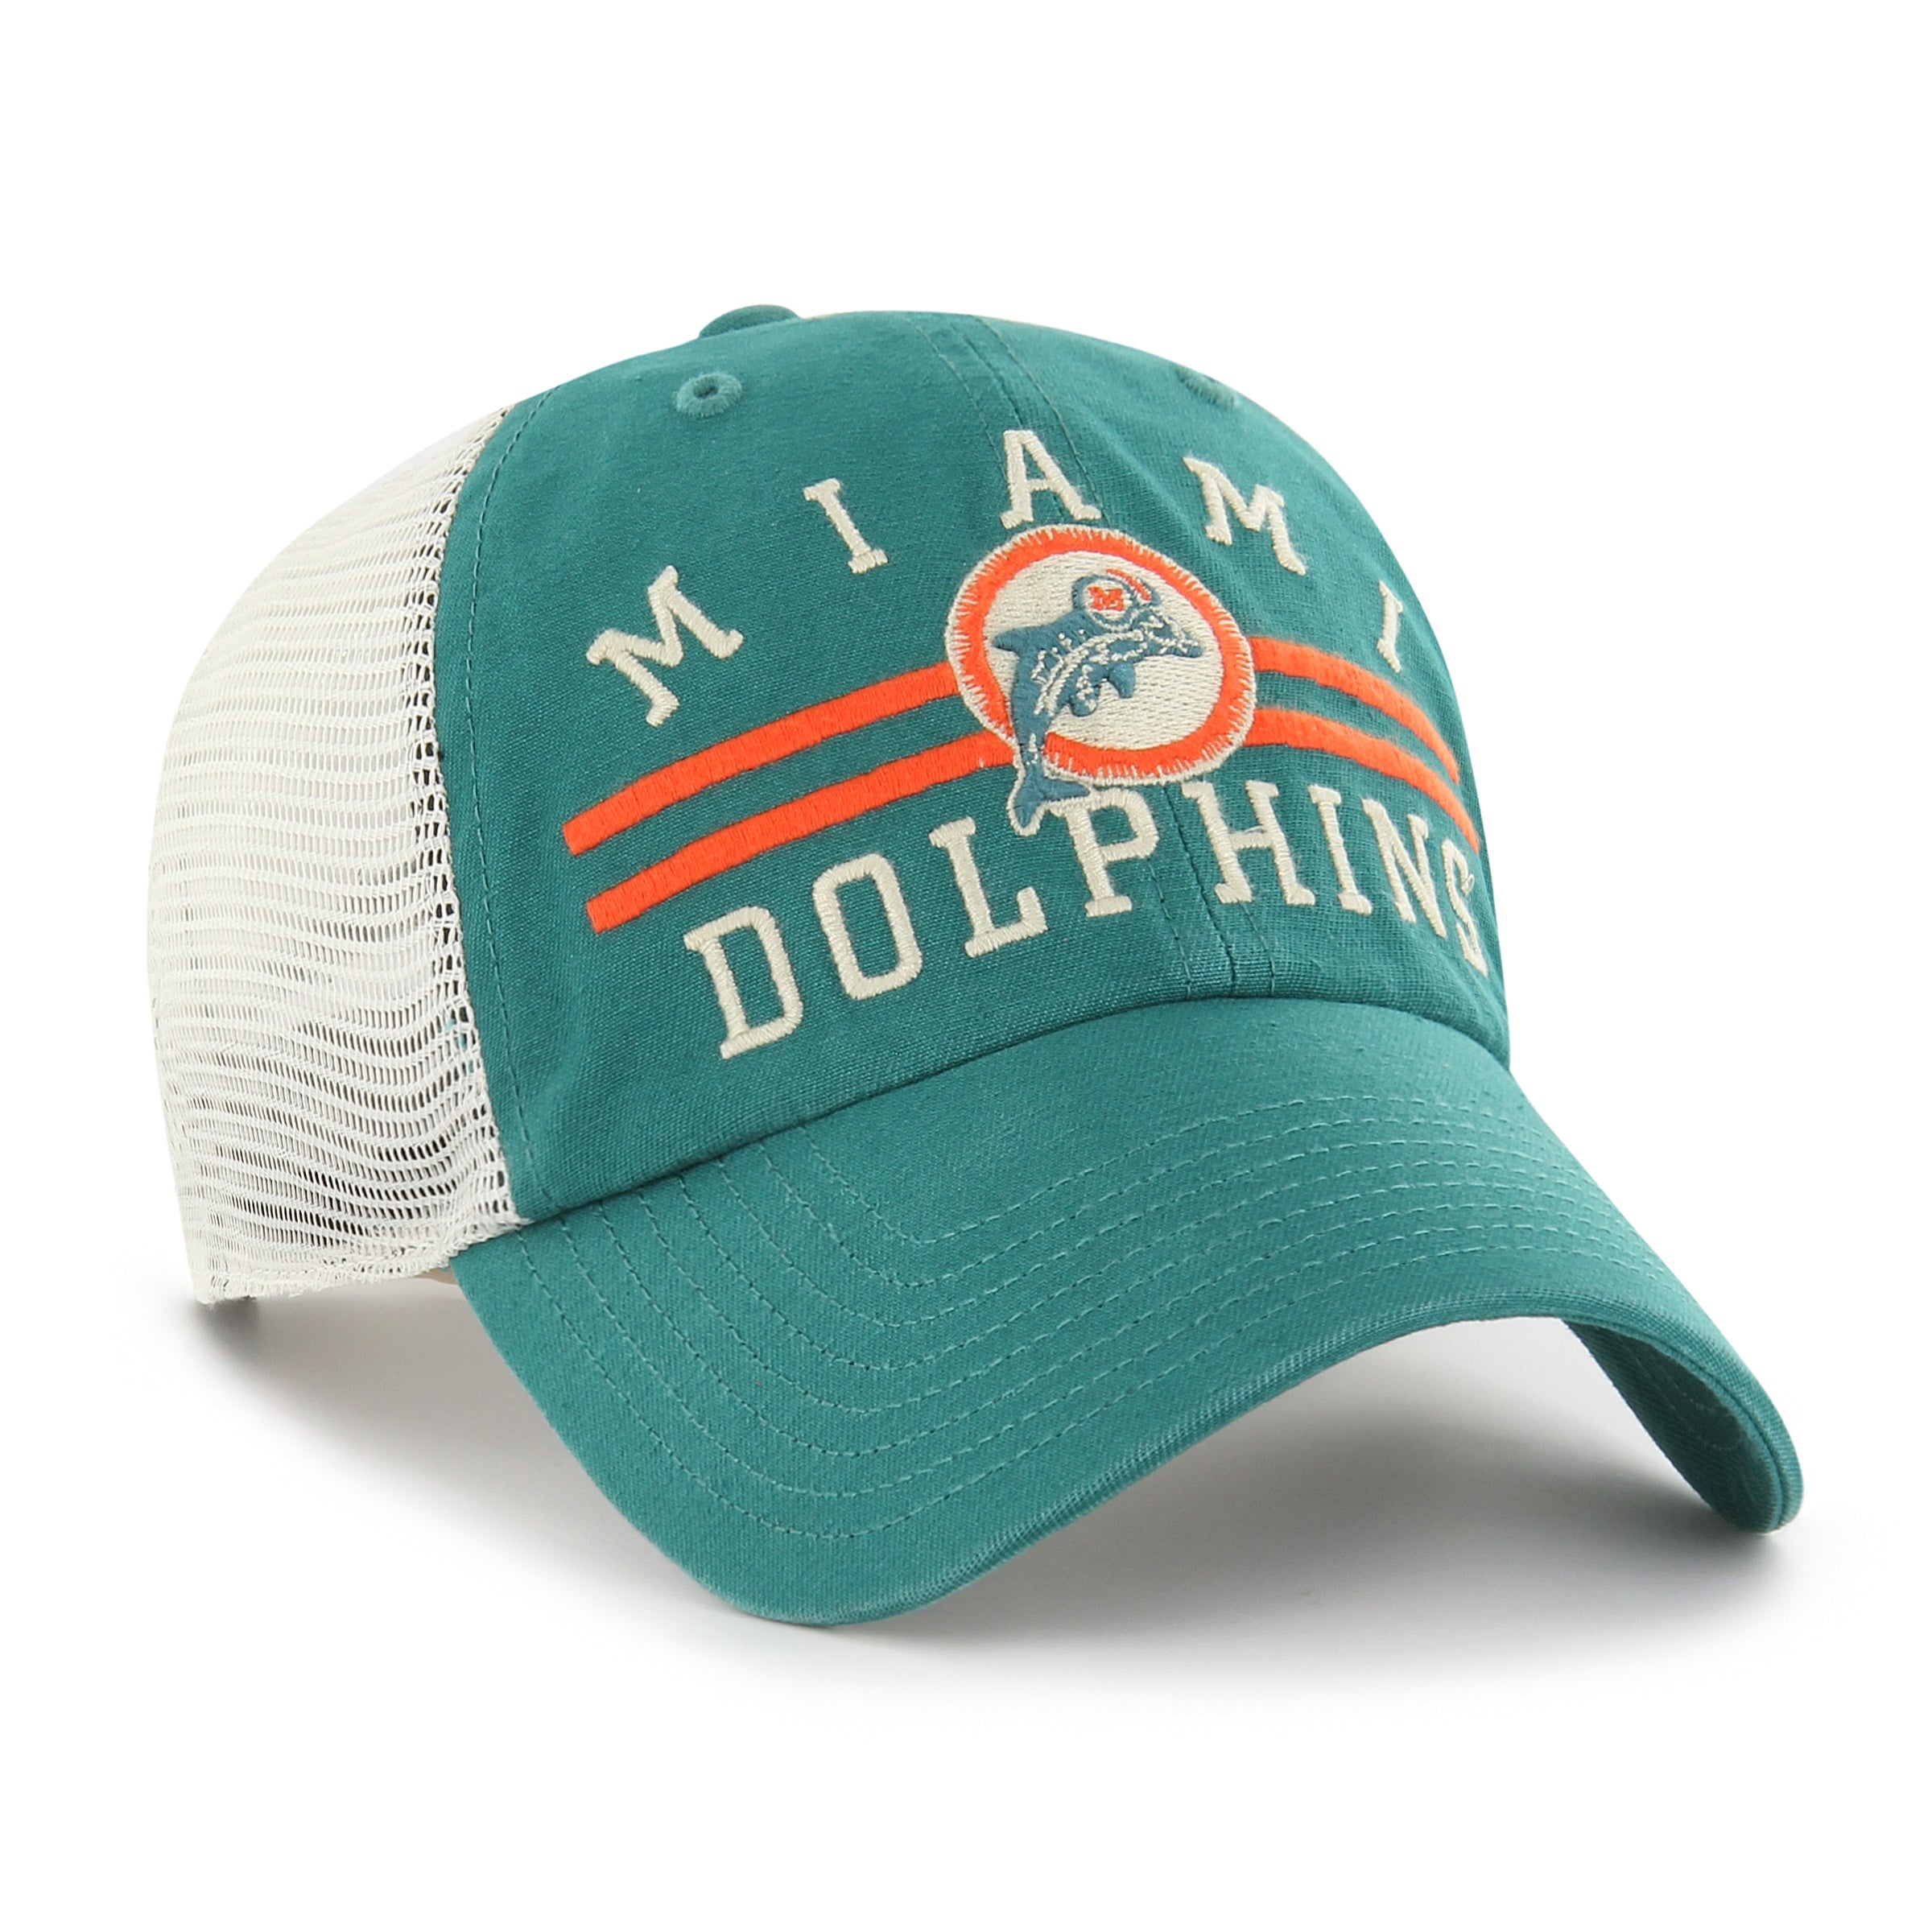 Up Dolphins 47 Legacy Brand Adjustable Tailgate Hat Miami Teal Clean